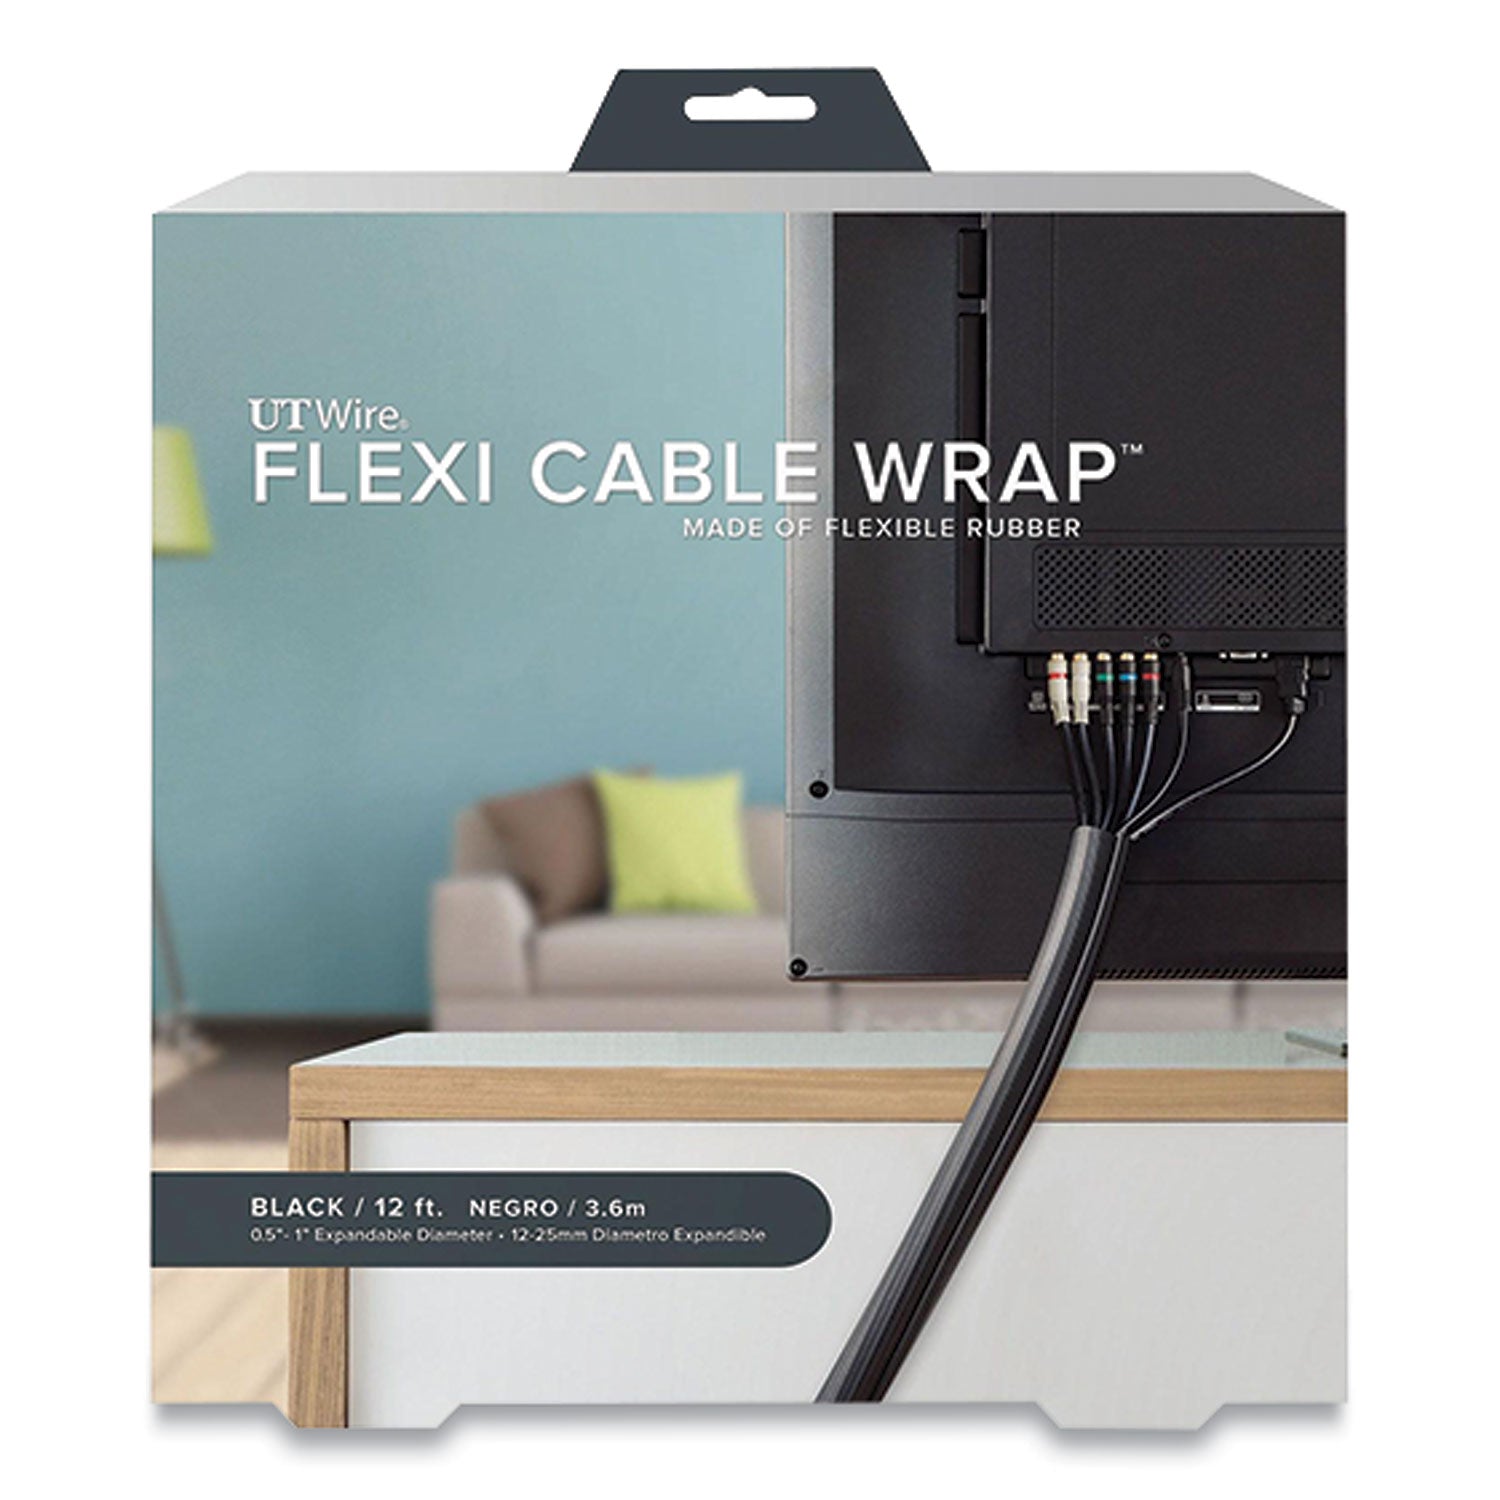 flexi-cable-wrap-05-to-1-x-12-ft-black_rboutwfcw12bk - 1